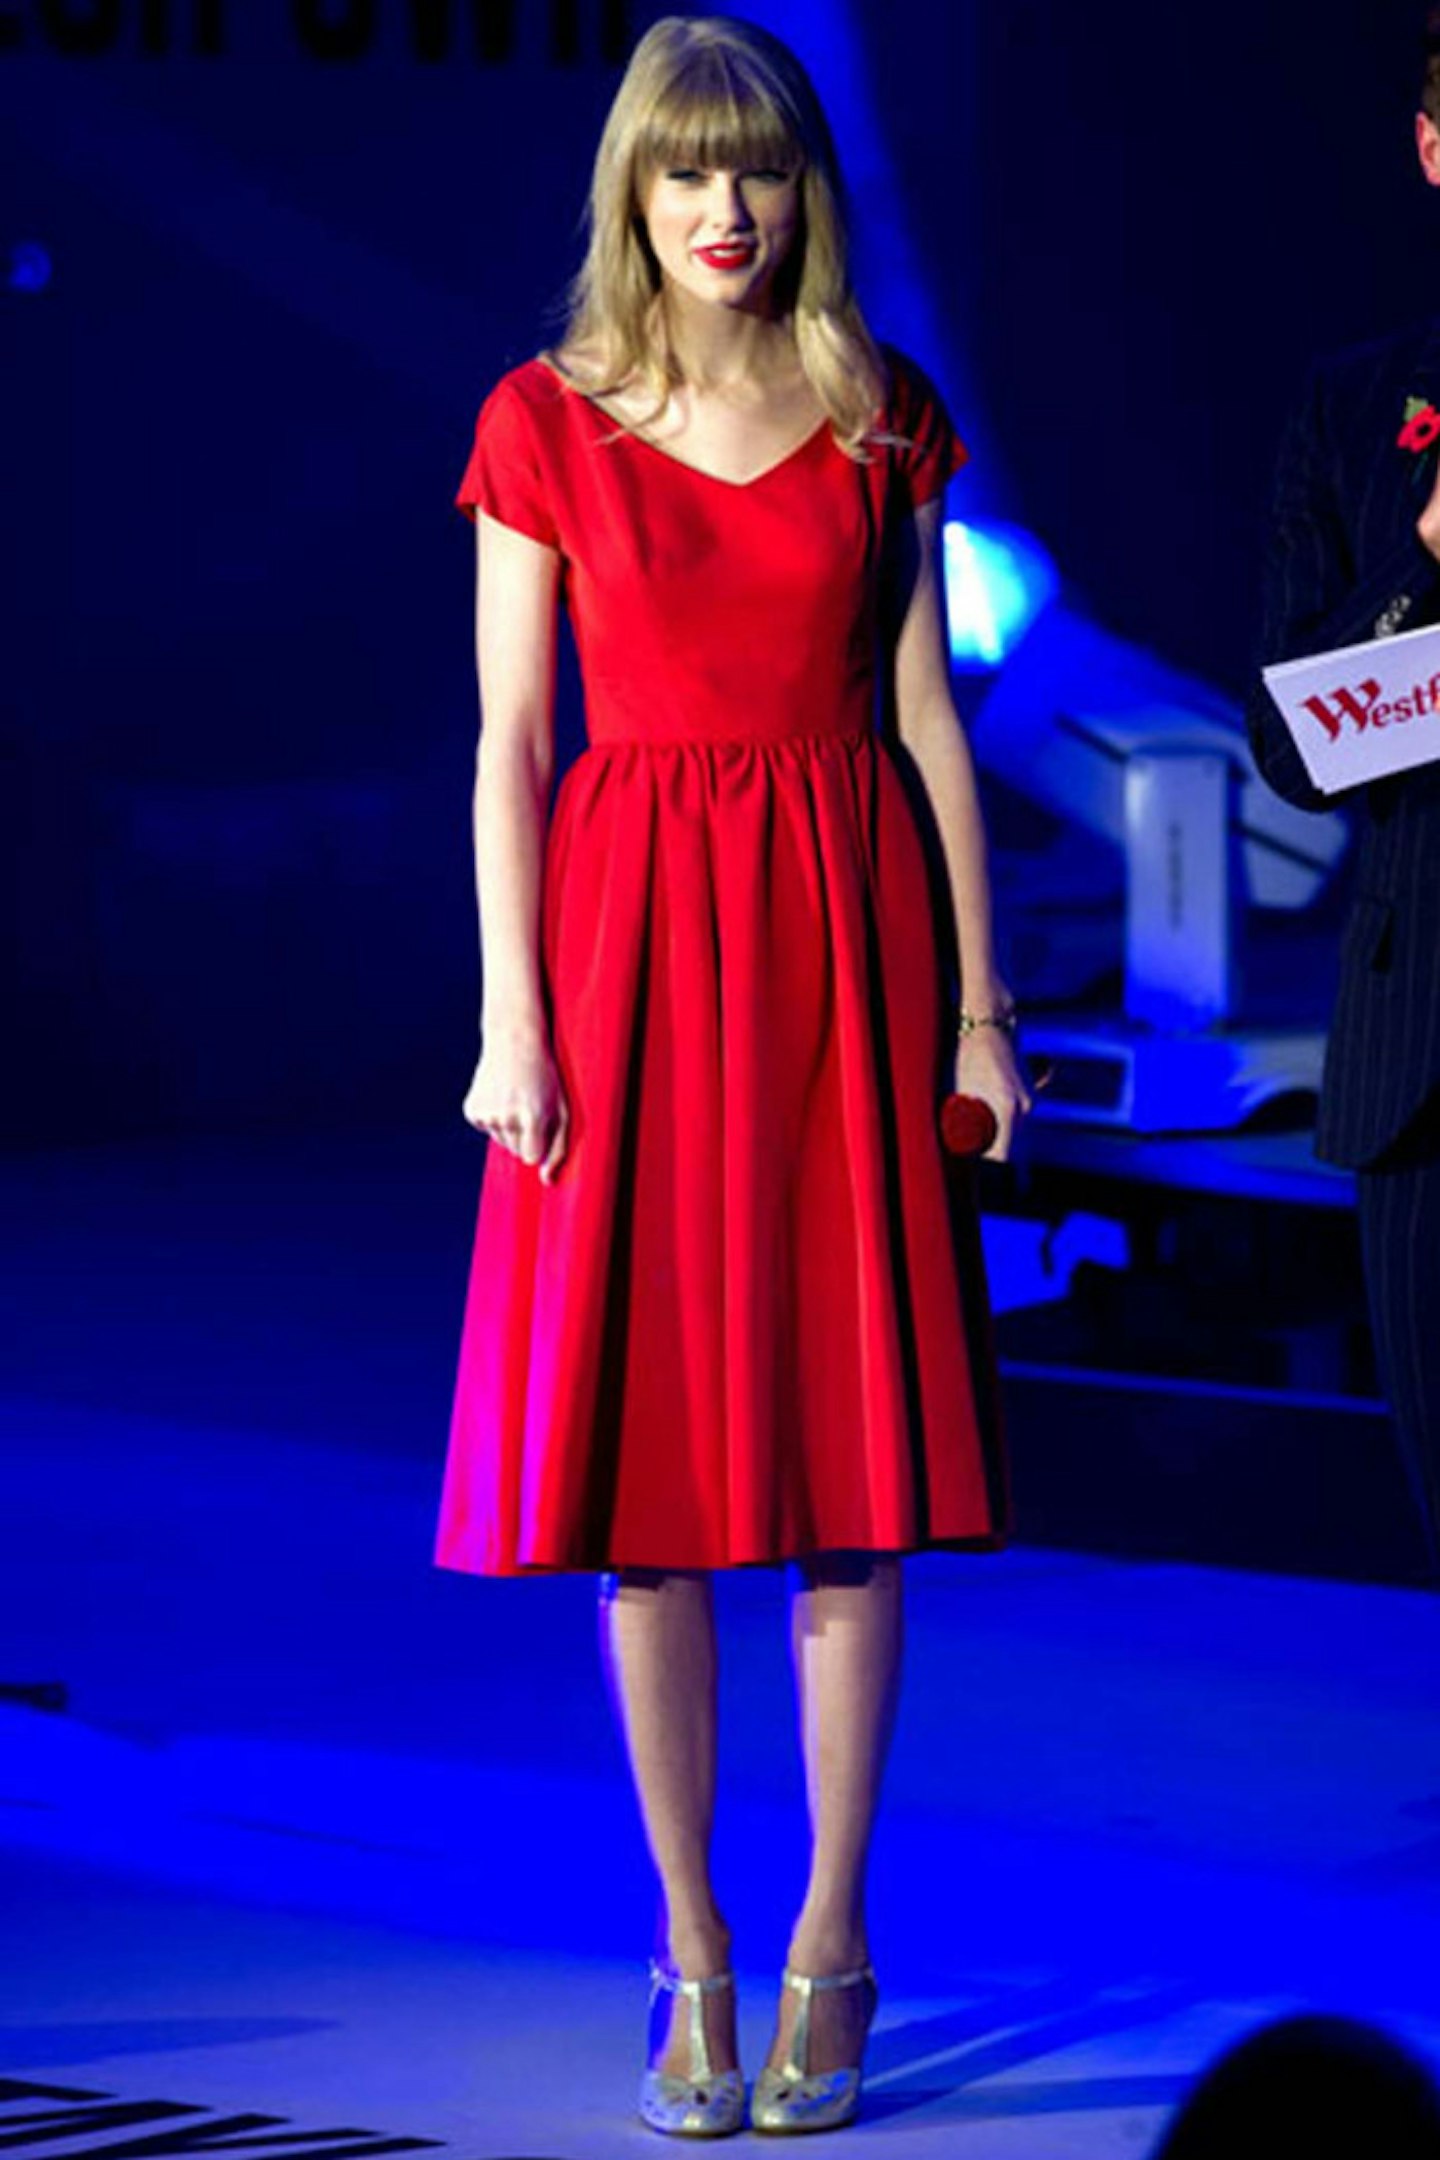 Taylor Swift at Westfield Shopping Centre, 6 November 2012